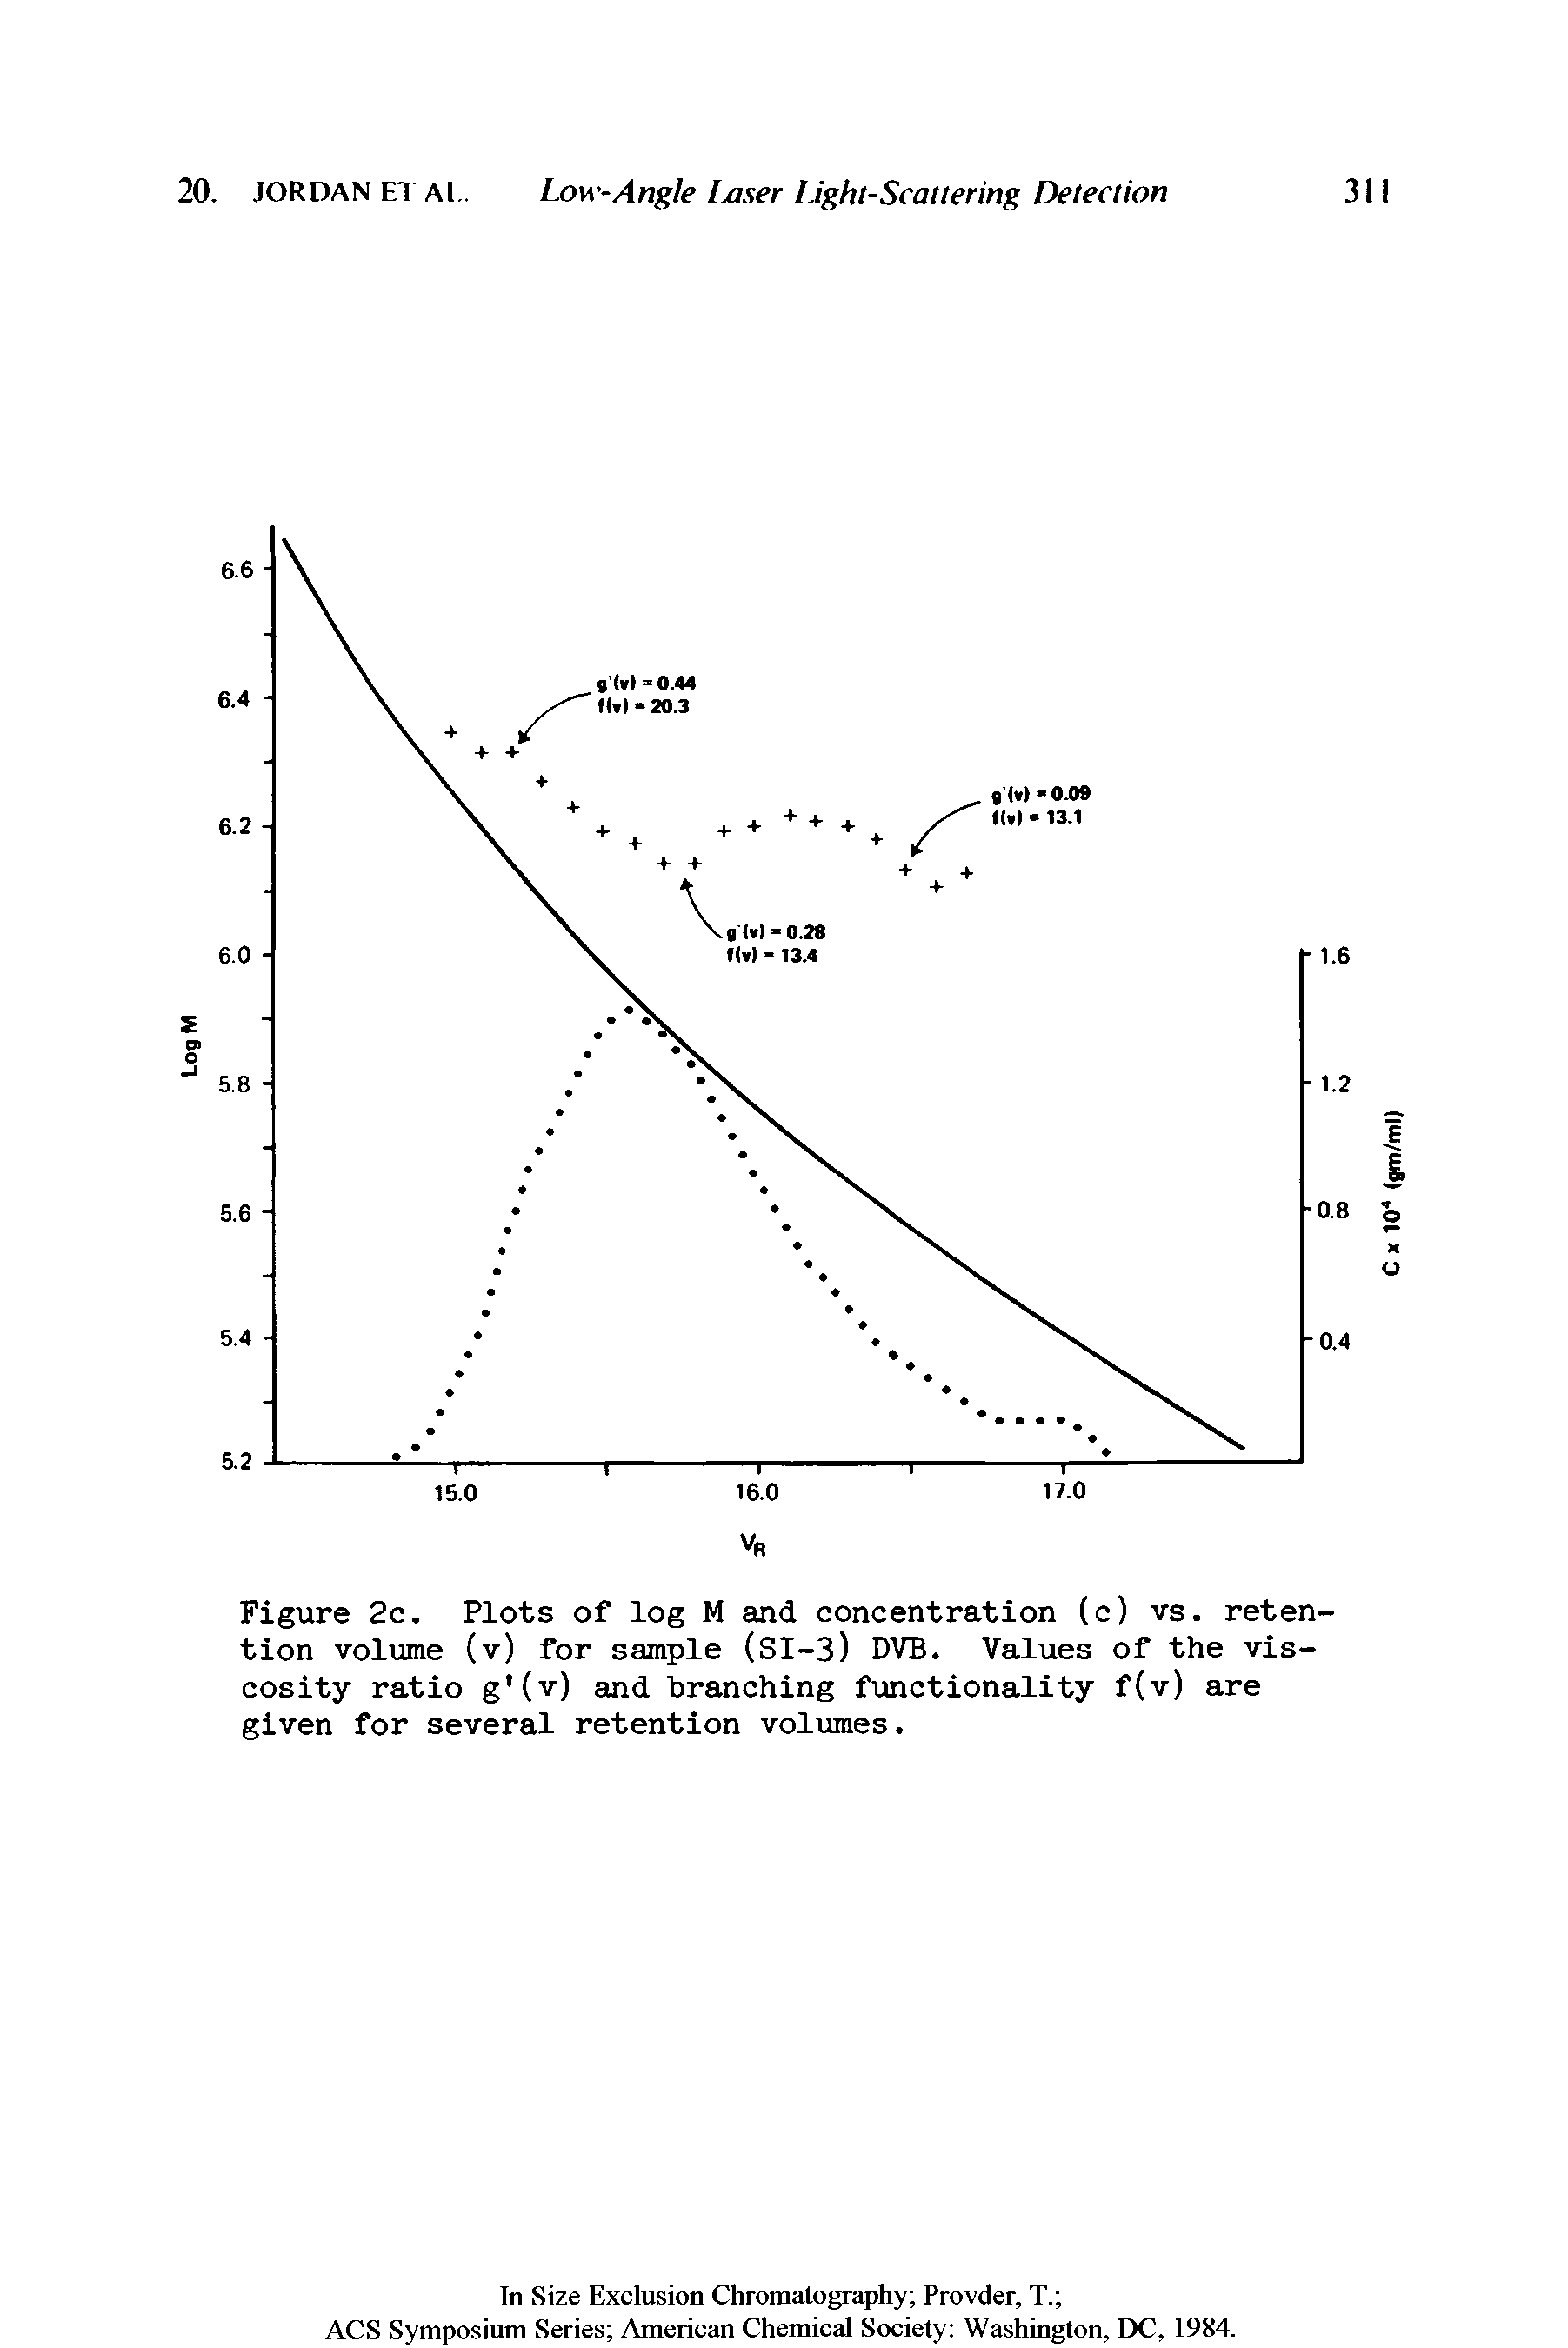 Figure 2c. Plots of log M and concentration (c) vs. retention voltame (v) for sample (SI-3) DVB. Values of the viscosity ratio g (v) and branching functionality f(v) are given for several retention volumes.